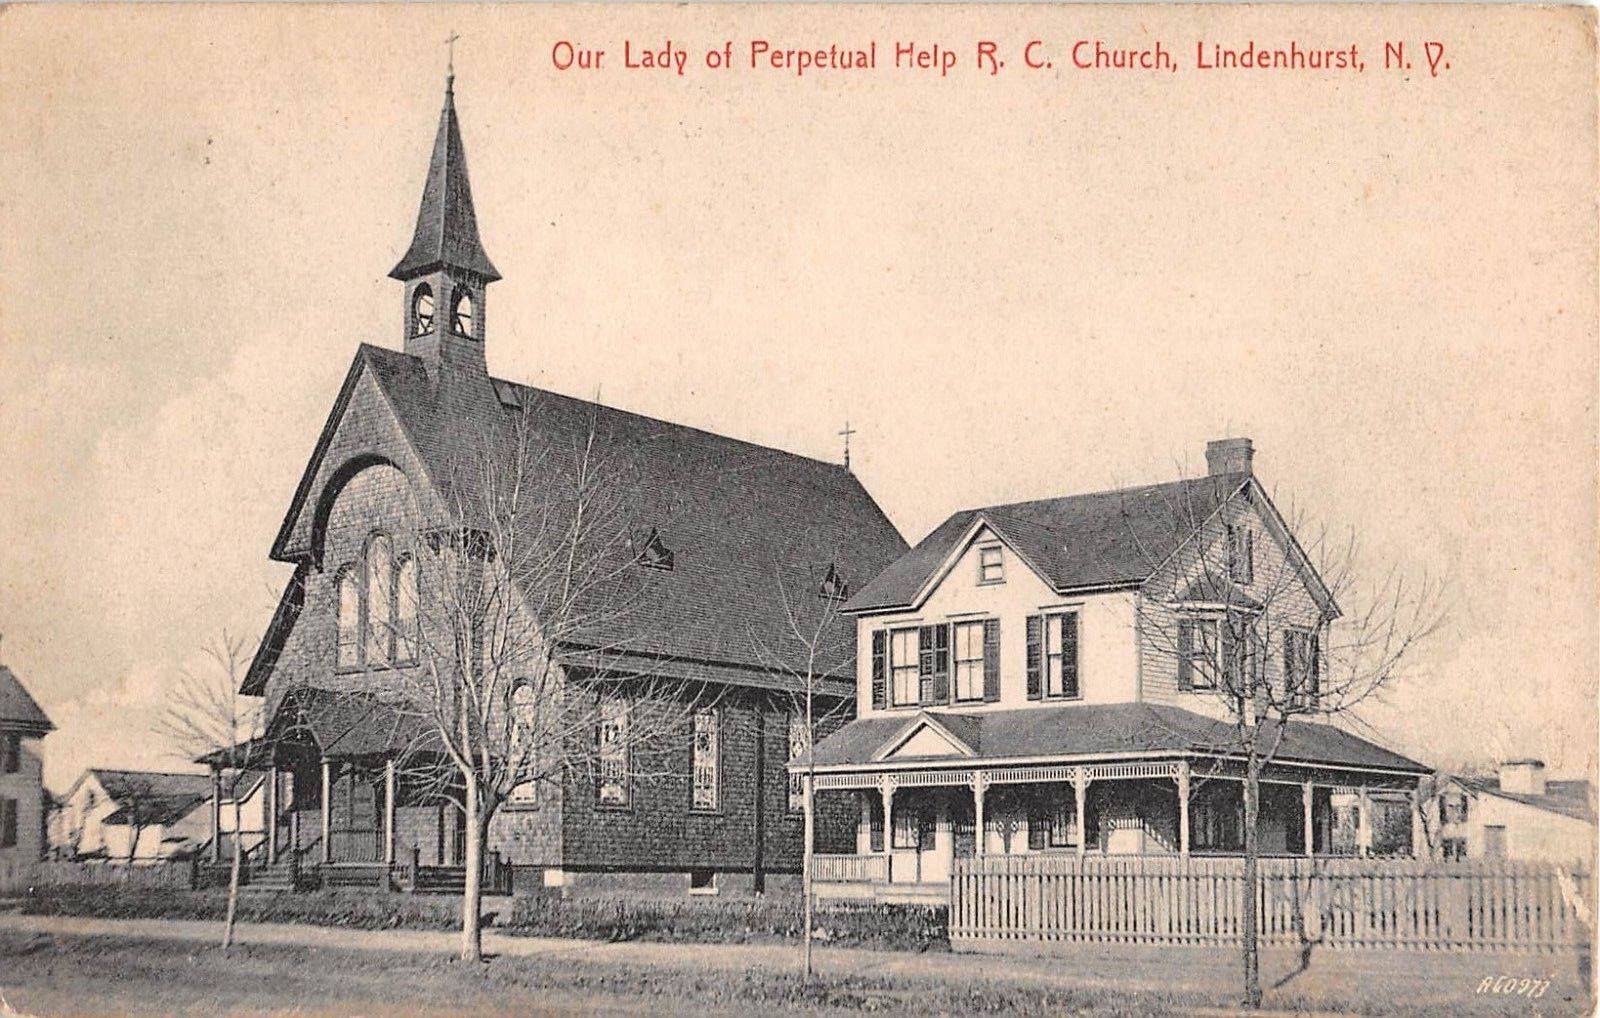 Our Lady of Perpetual Help Roman Catholic Church.